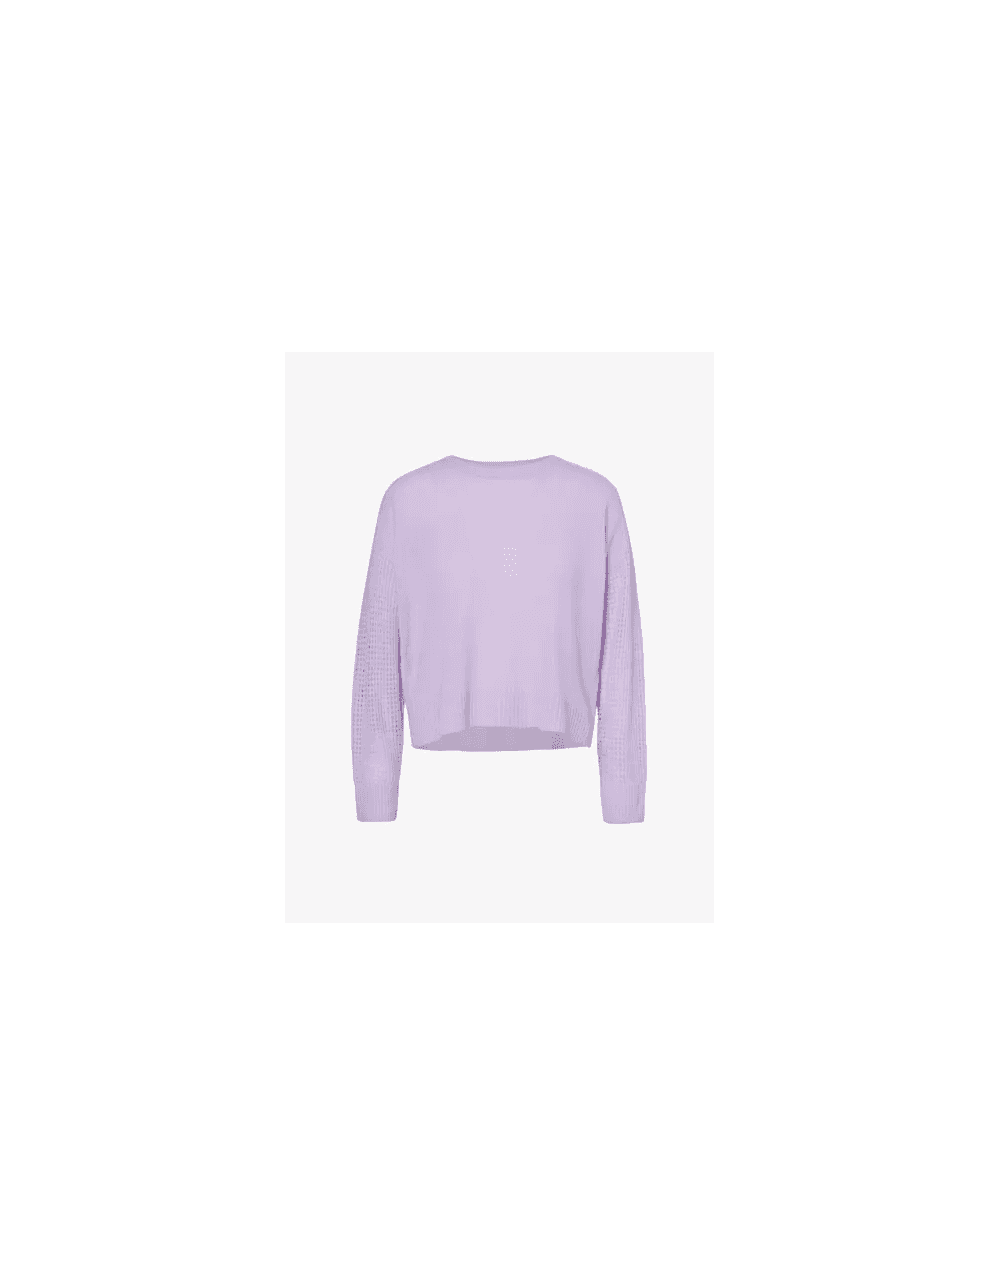 360-cashmere-360-cashmere-riley-crew-open-stitch-sleeves-jumper-size-m-col-lilac